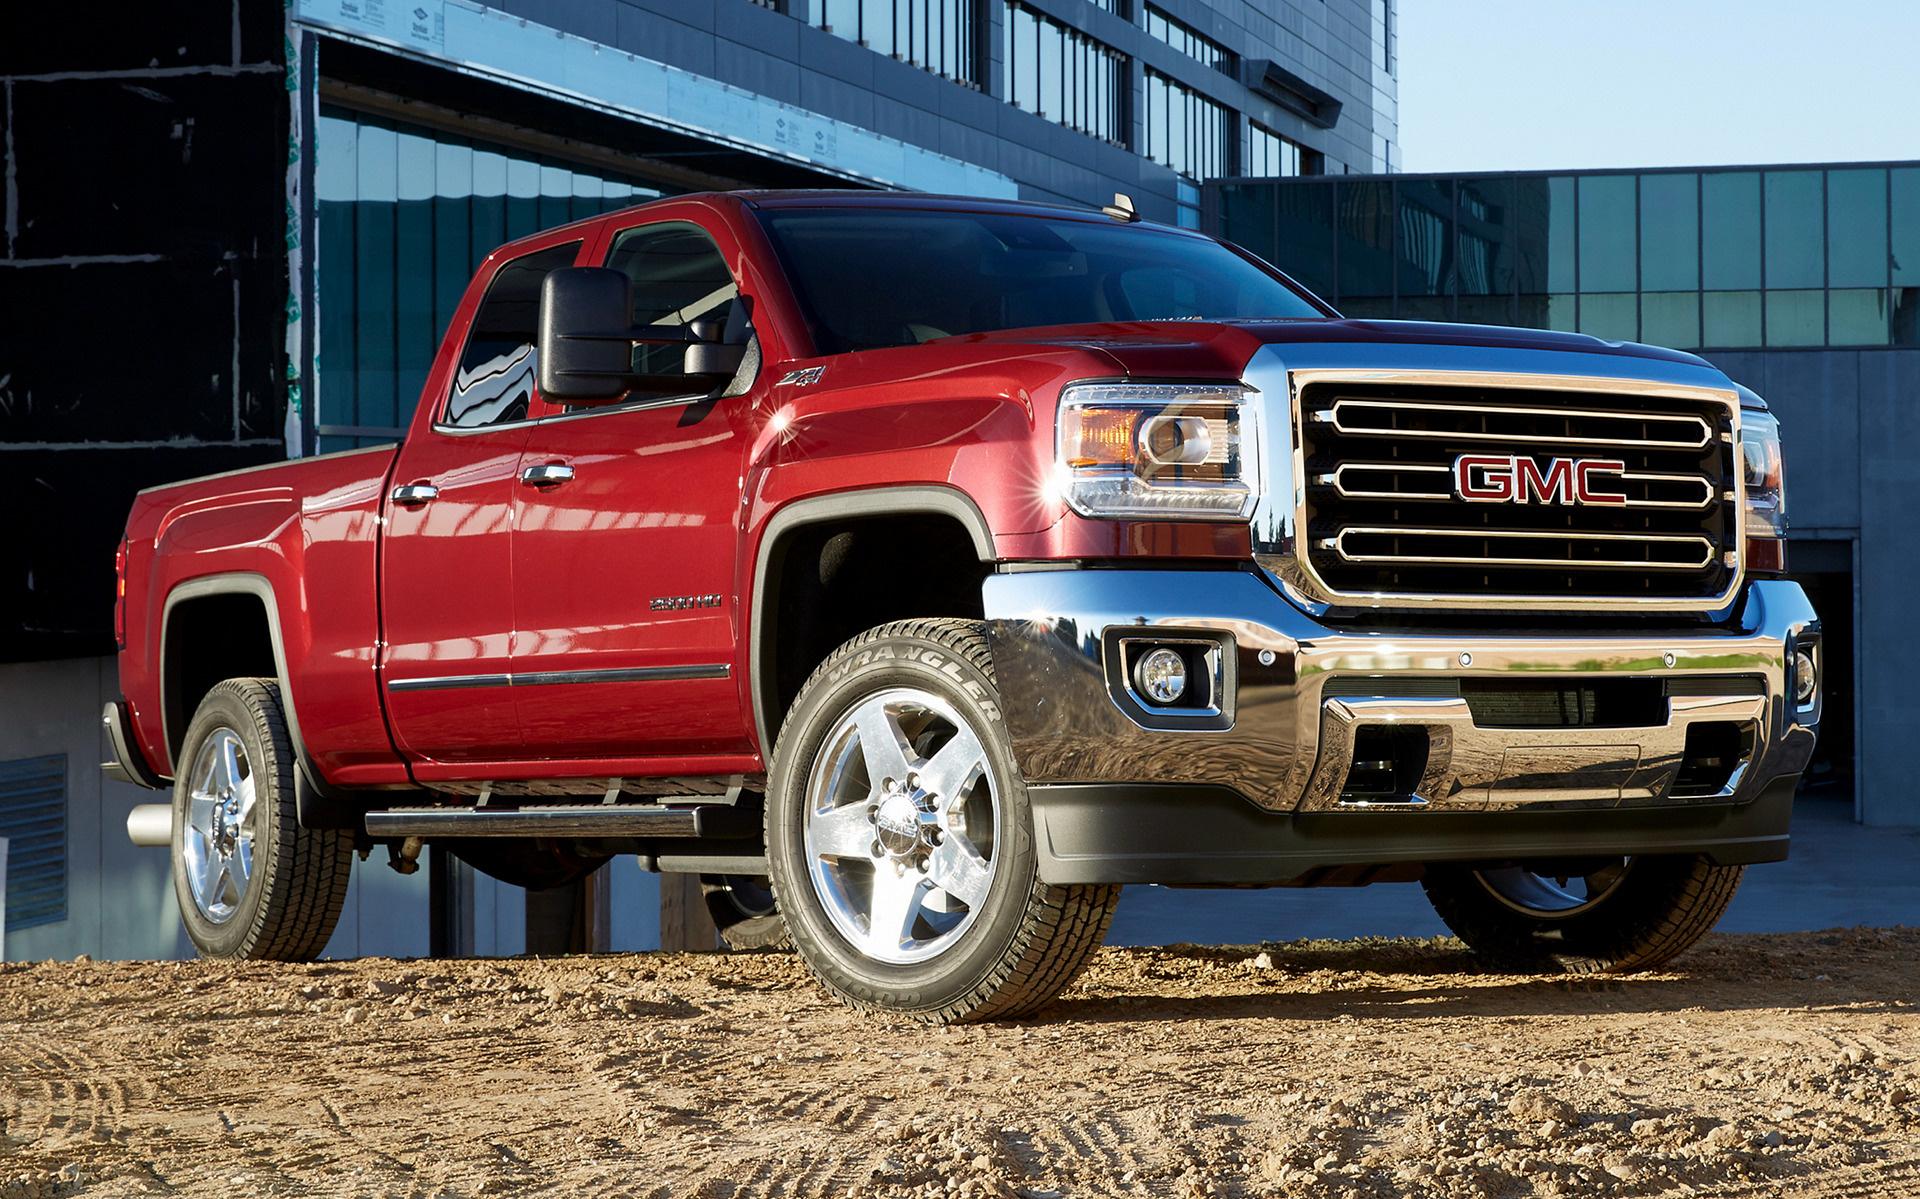 Gmc Sierra HD Slt Double Cab Wallpaper And Image